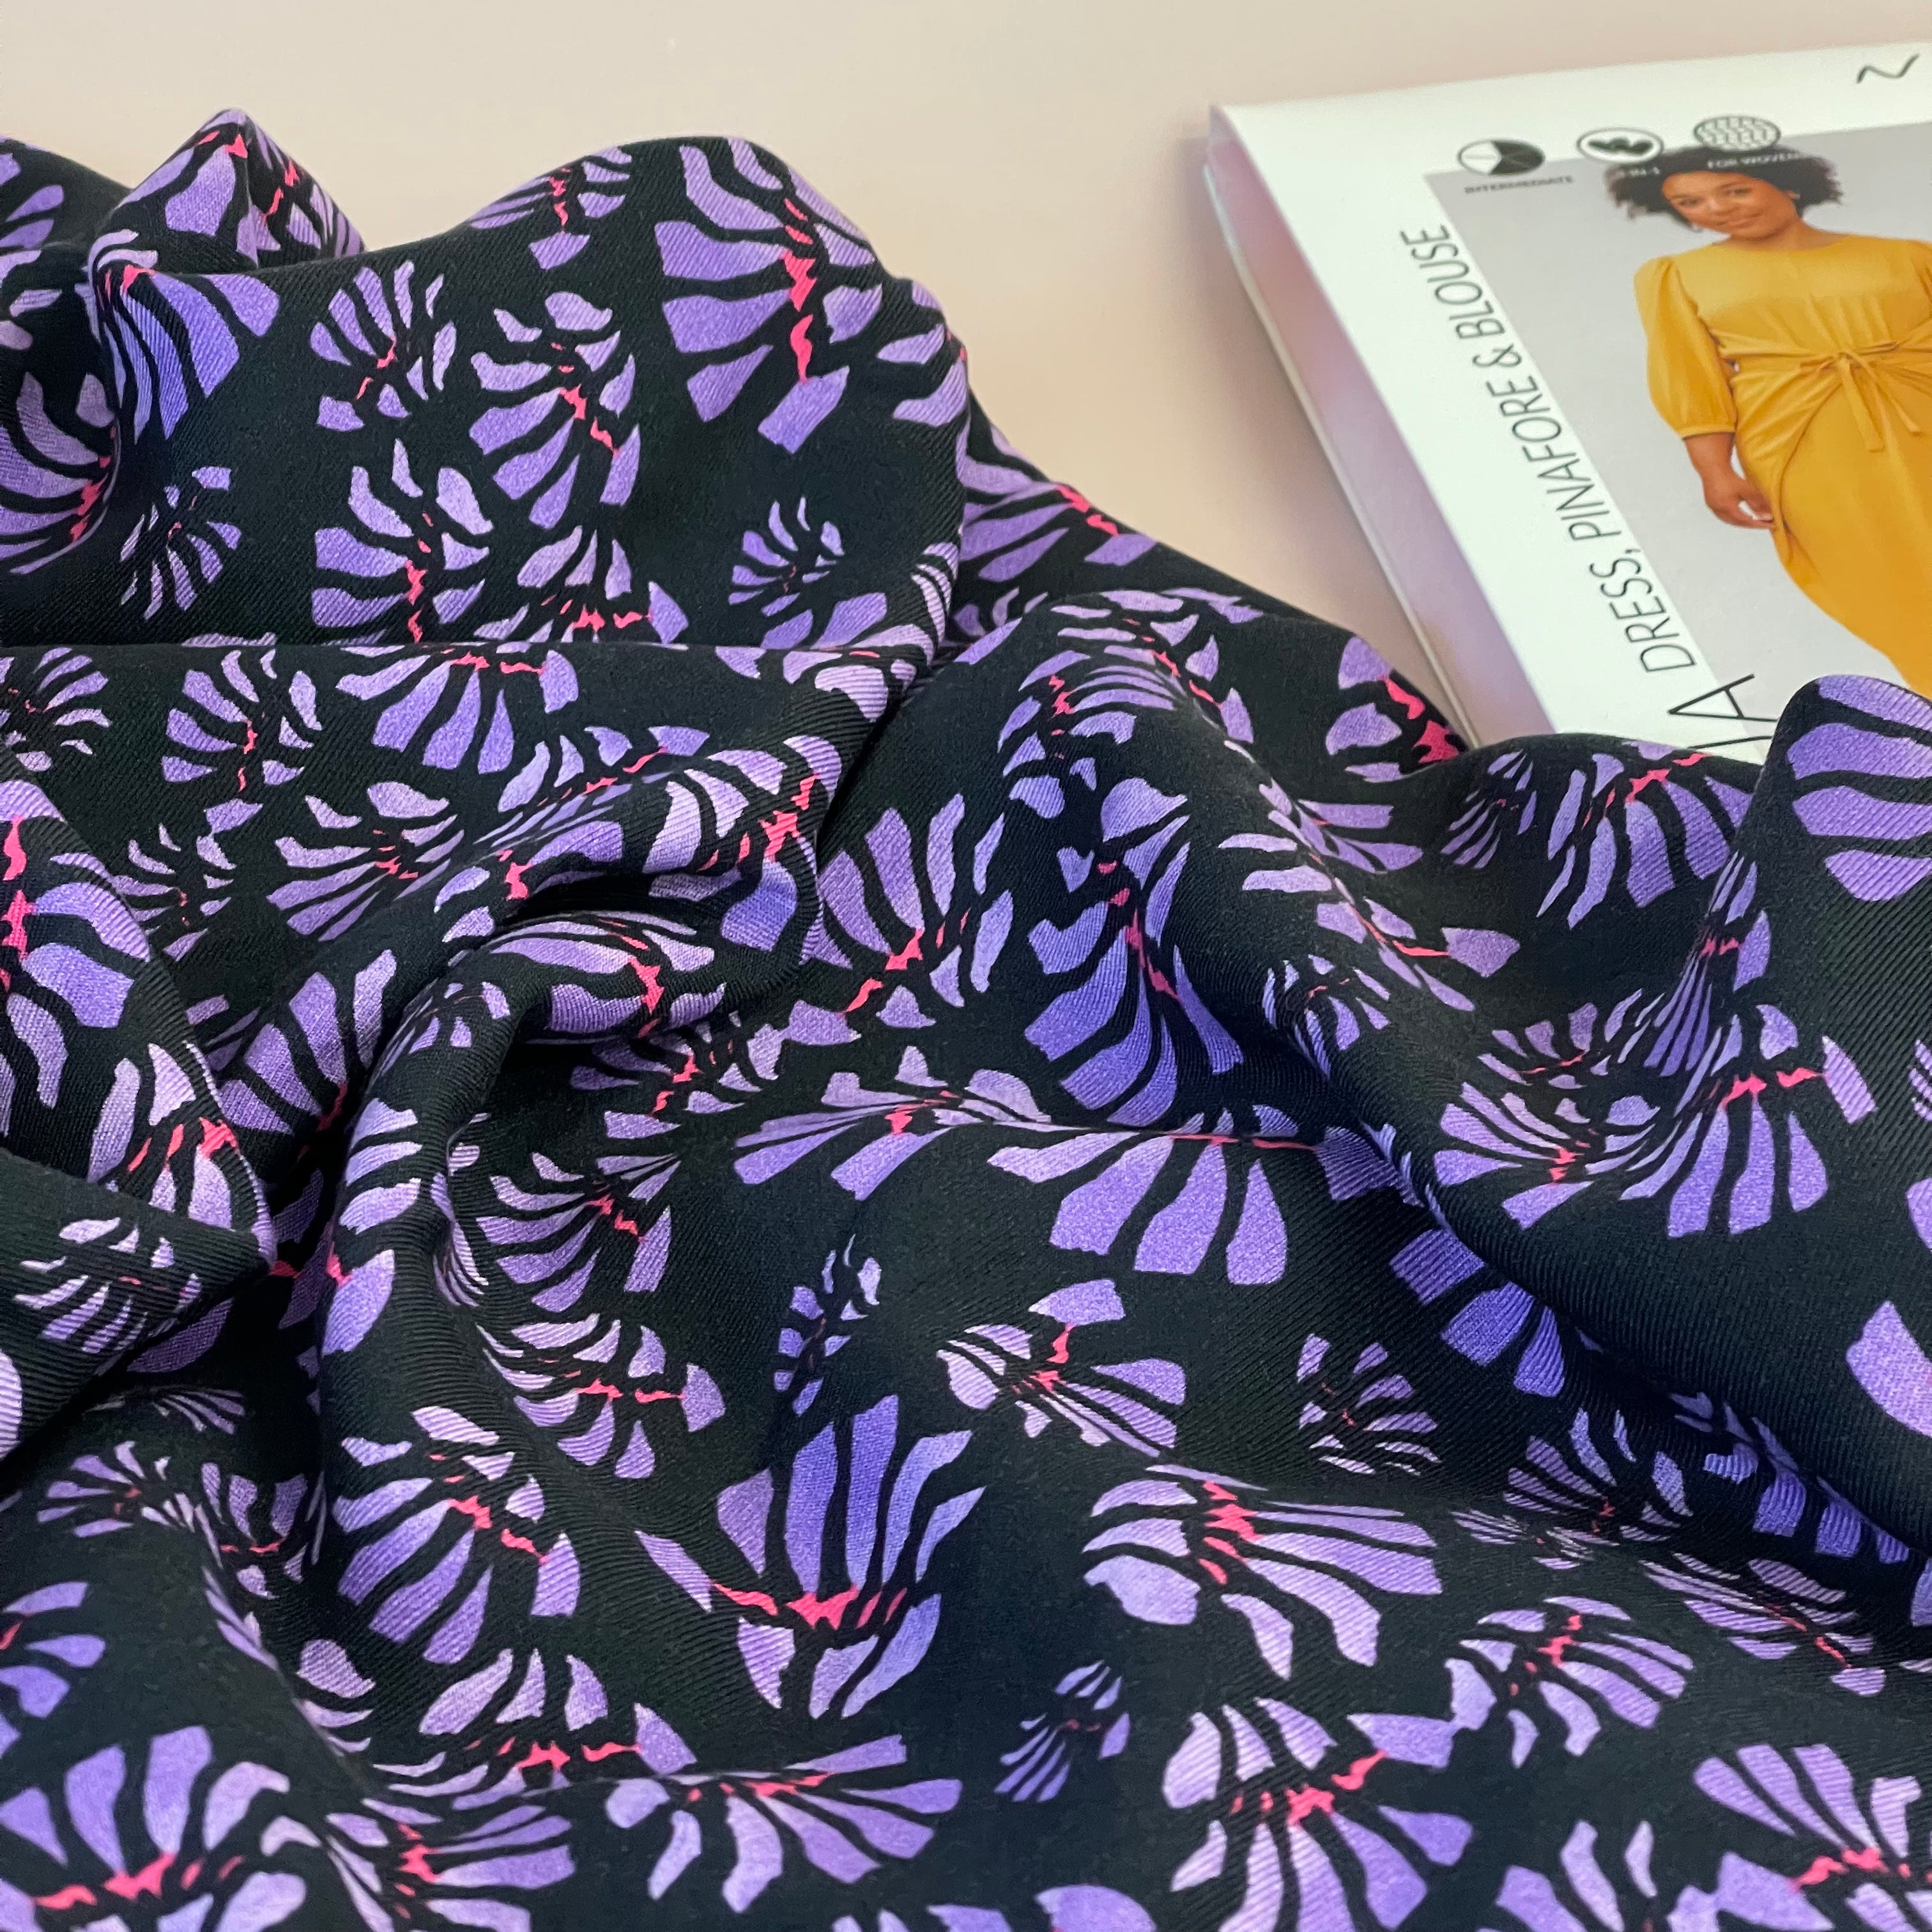 Sewing Kit - Lilja Blouse & Dress Sewing Kit in Abstract Purple Flowers Viscose Twill